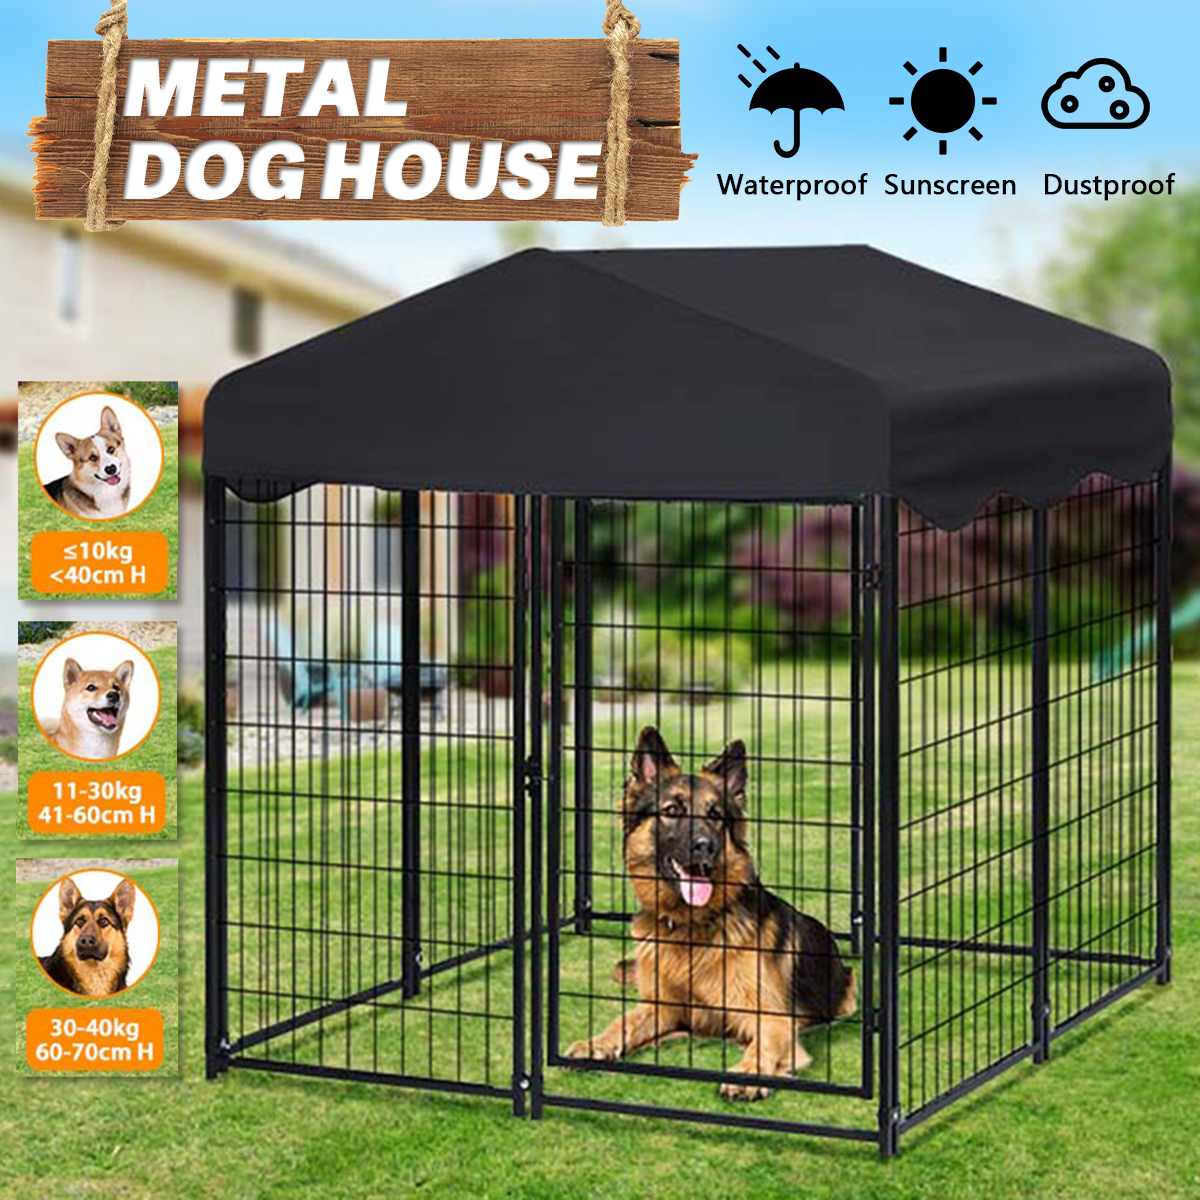 Feet Outdoor Dog Kennel Heavy Duty Metal Doghouse Large Pets Playpen Cage.